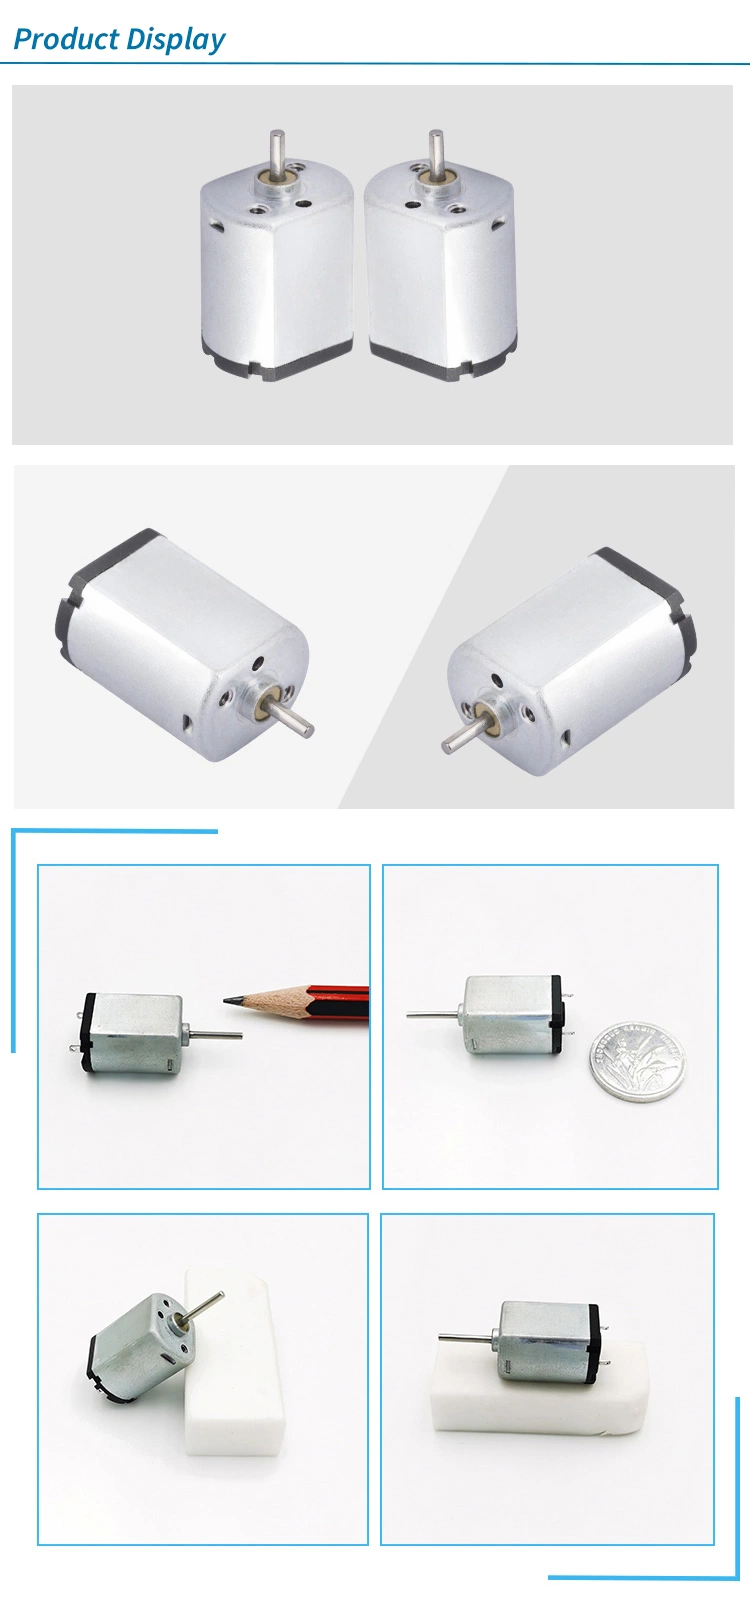 Kinmore 4.7V DC Motors for Small Motor Electric Motor Long Time Life for Game Controller